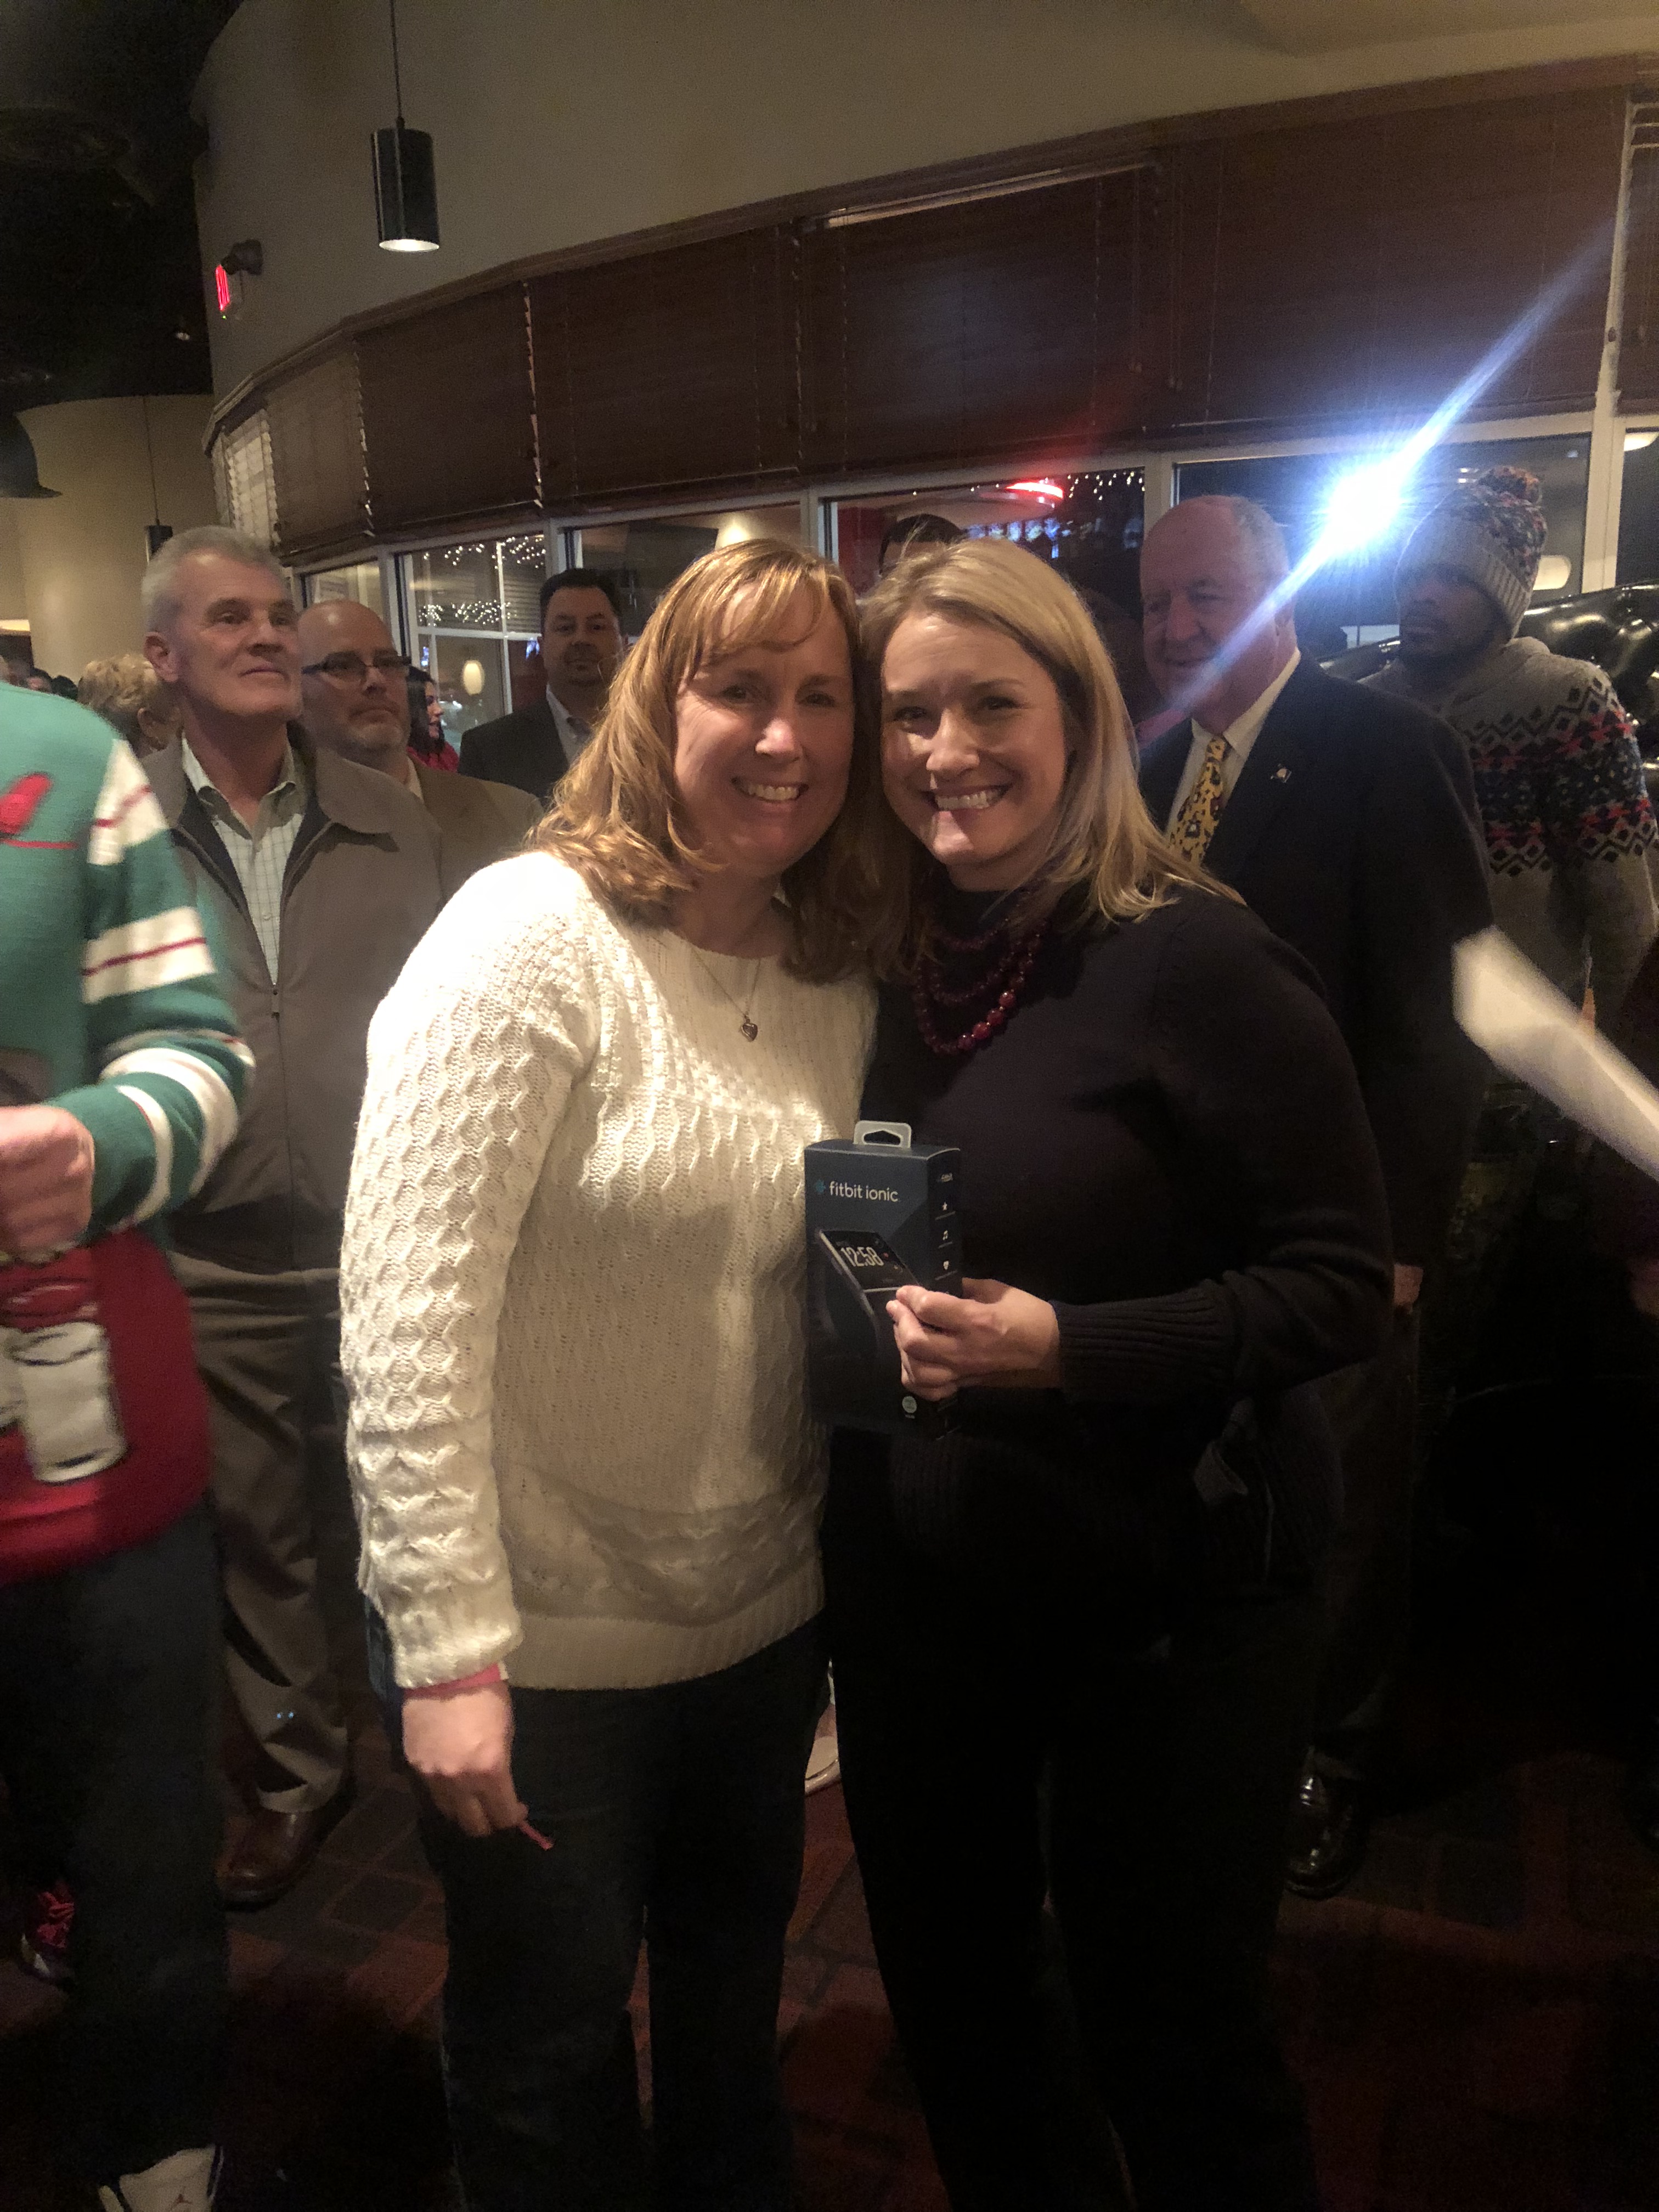 Grand prize winner at Hilldrup's 2017 Christmas party